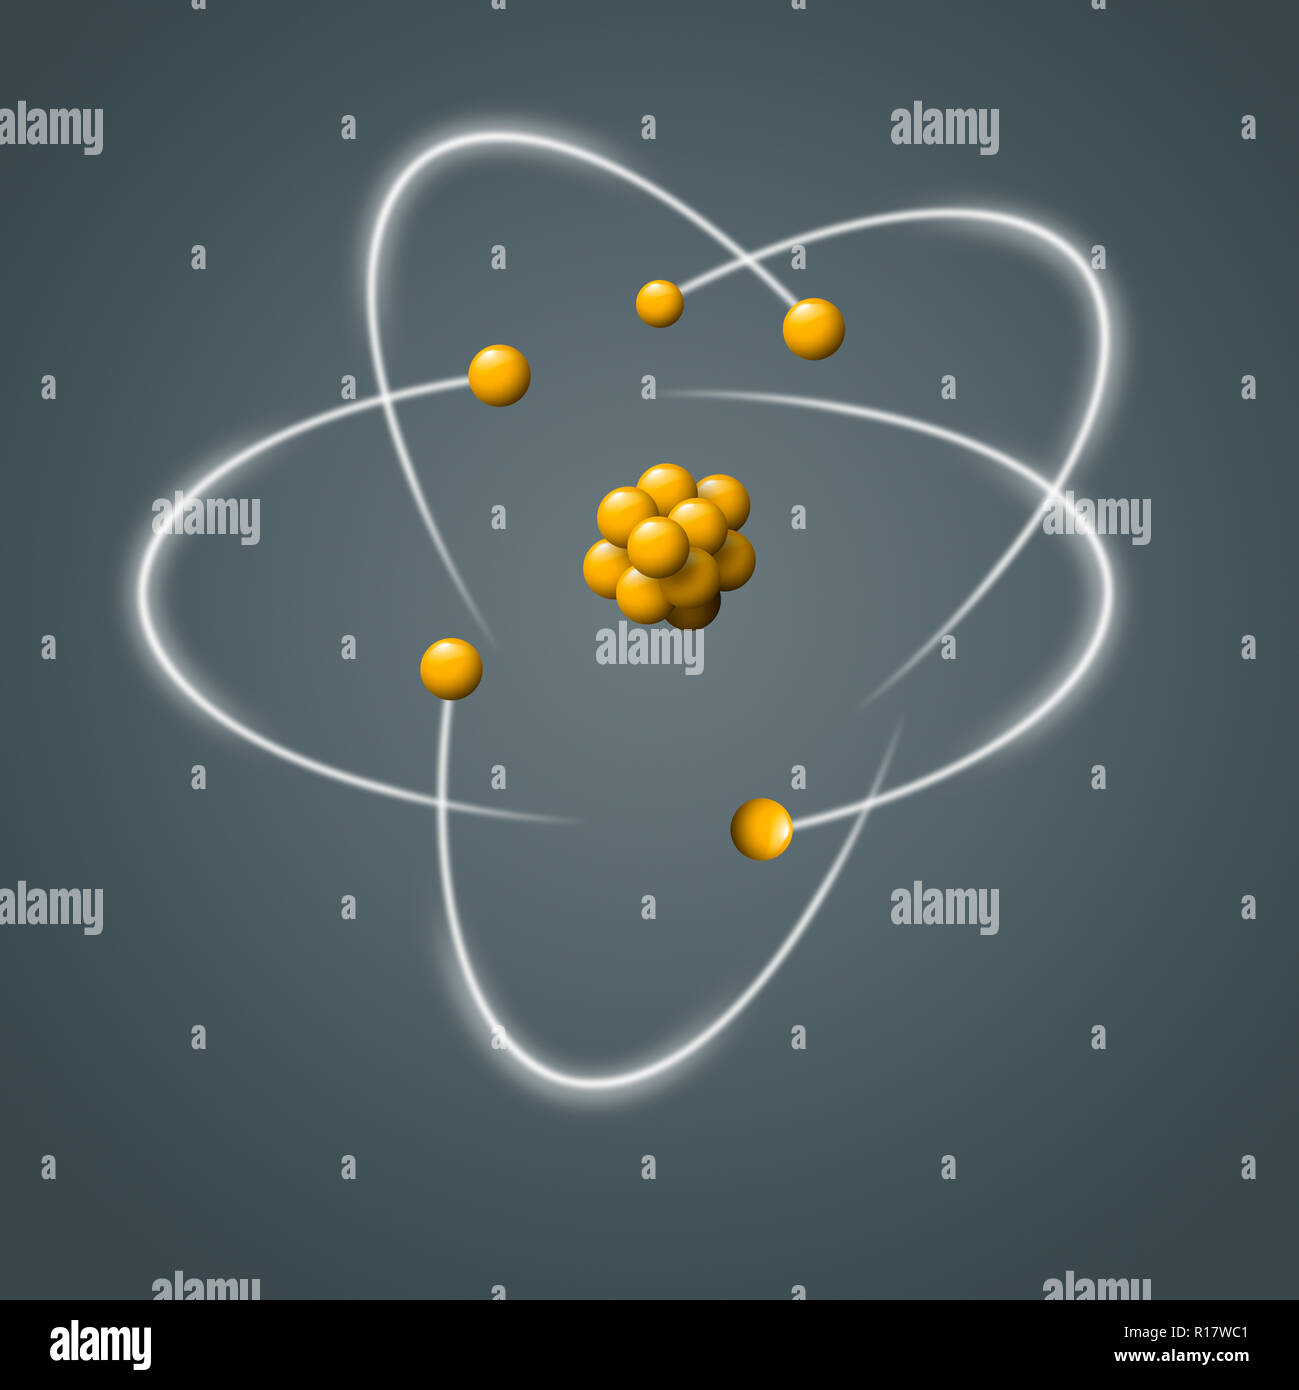 Yellow atomic particles surrounded by moving electrons on grey background, digital image Stock Photo